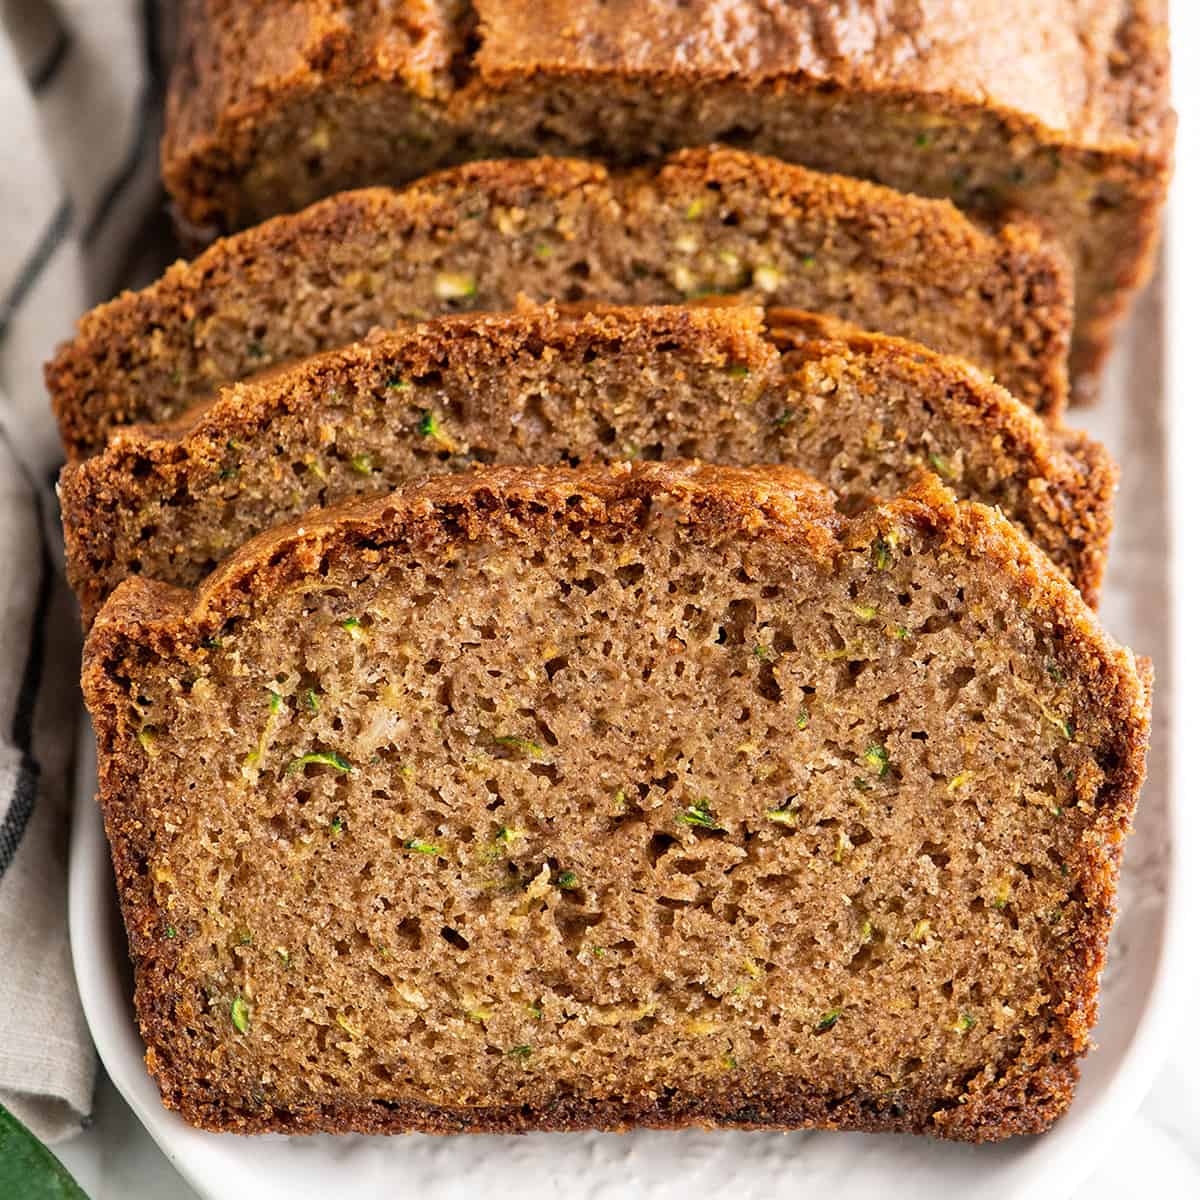 Front view of 3 slices of zucchini bread